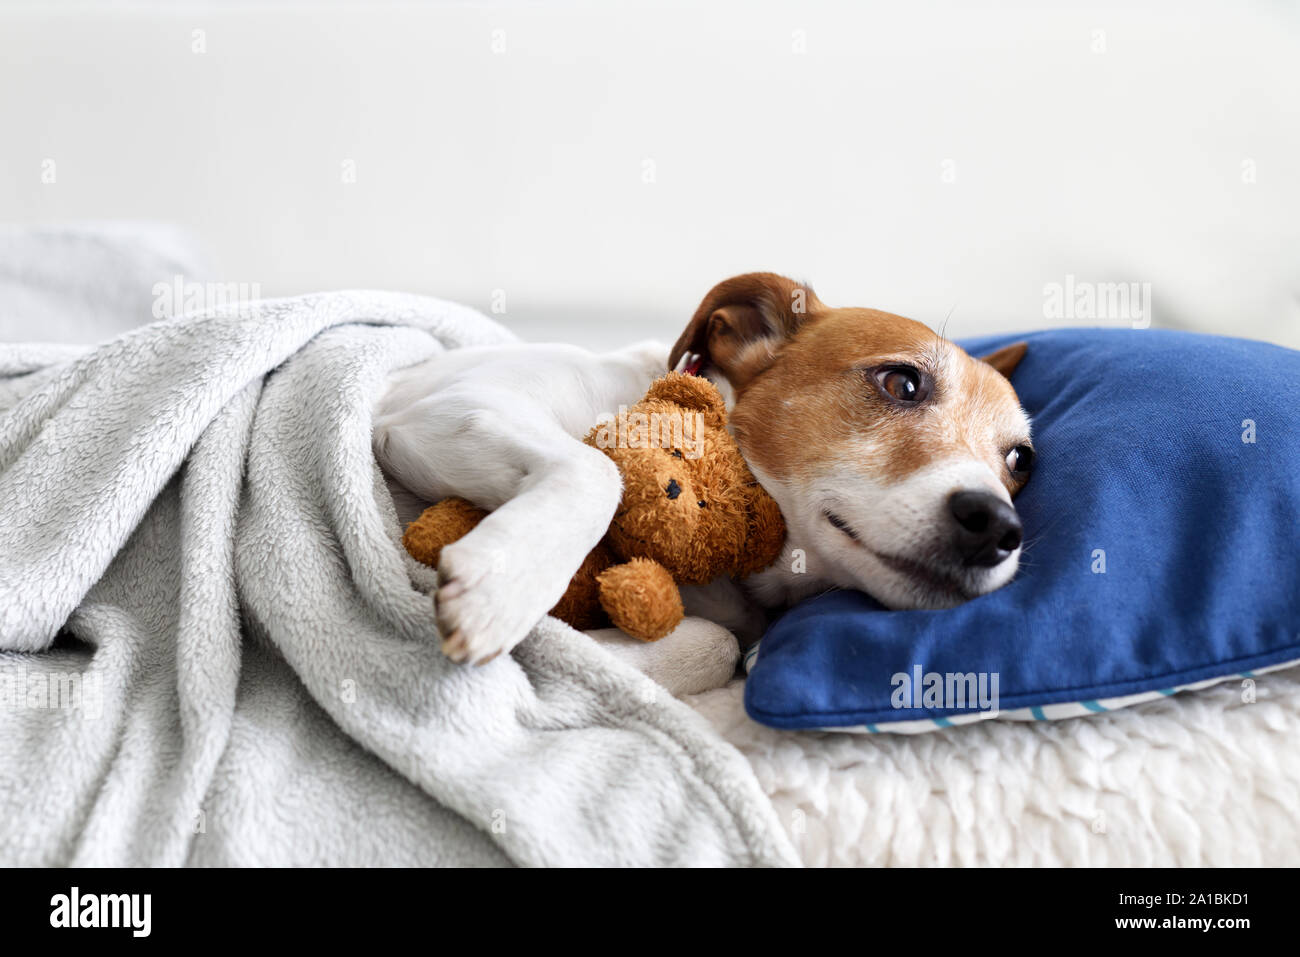 Sleeping Jack Russel terrier puppy dog with teddy bear toy Banque D'Images